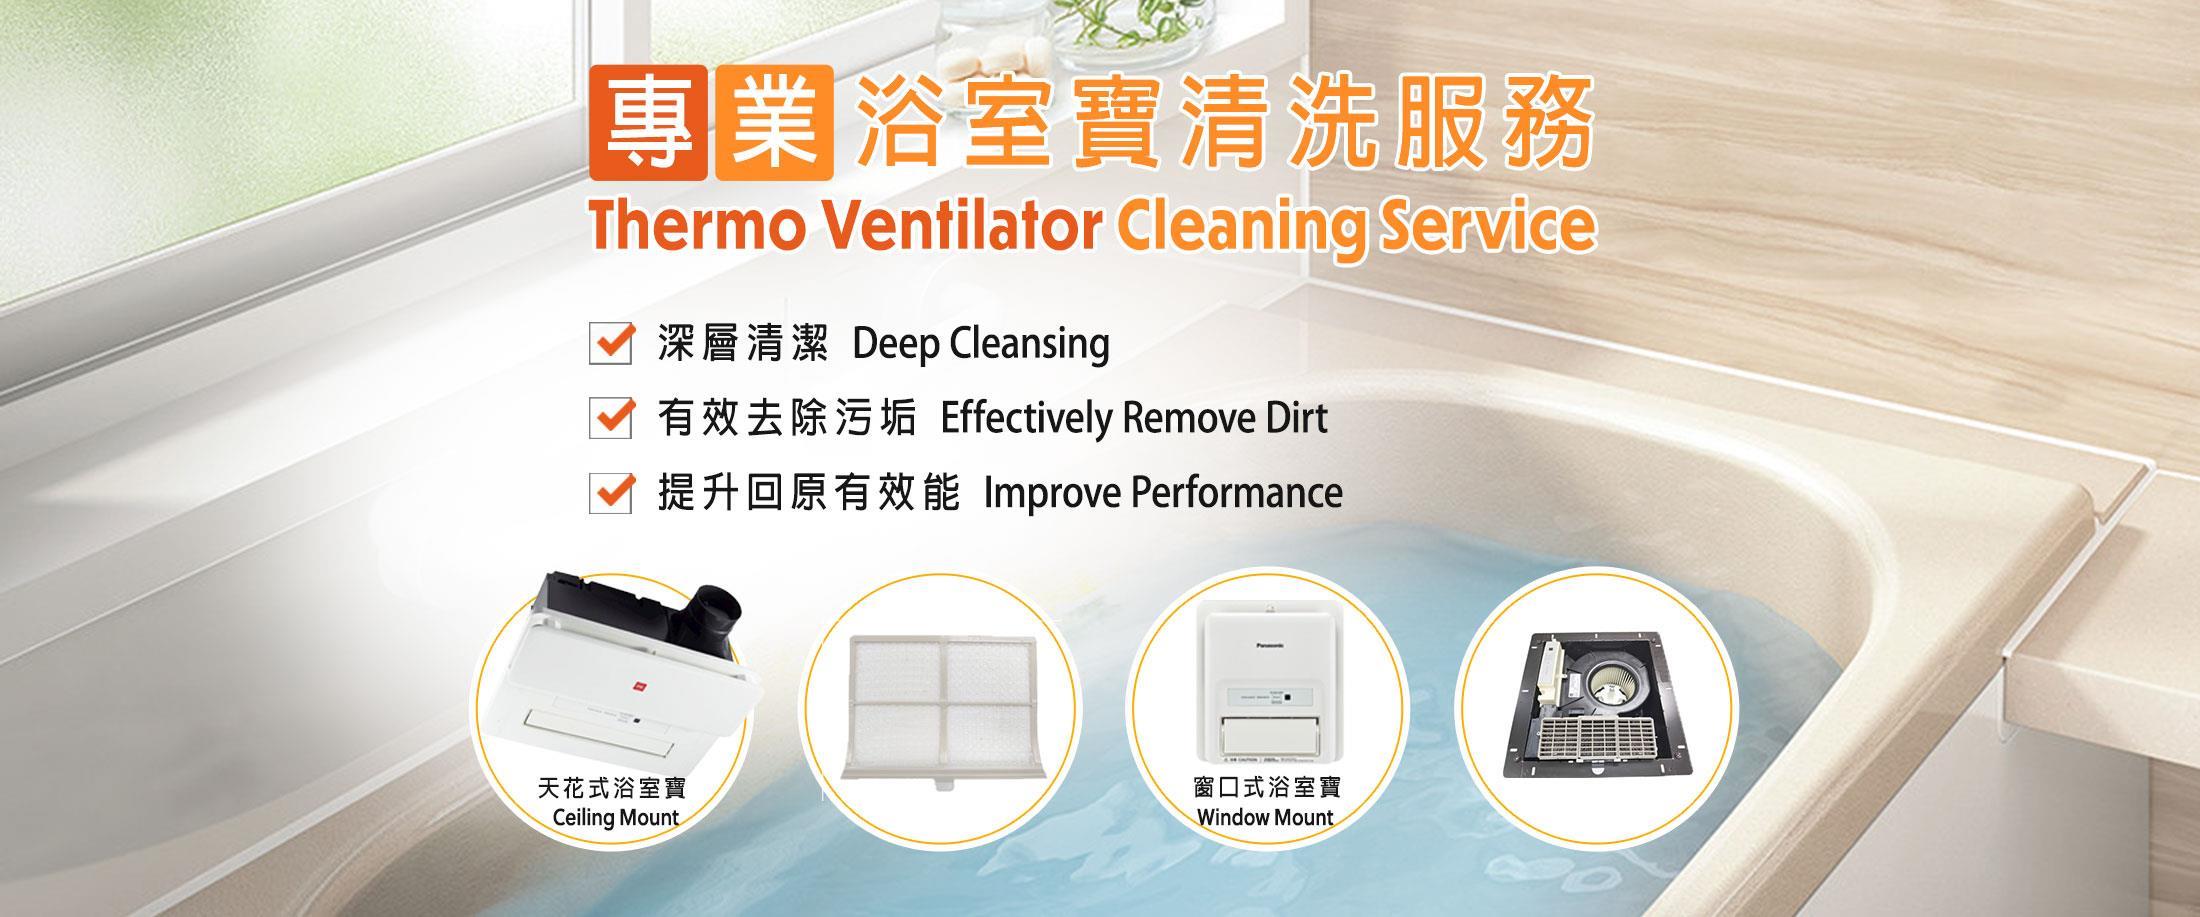 thermo_ventilator_cleansing_service